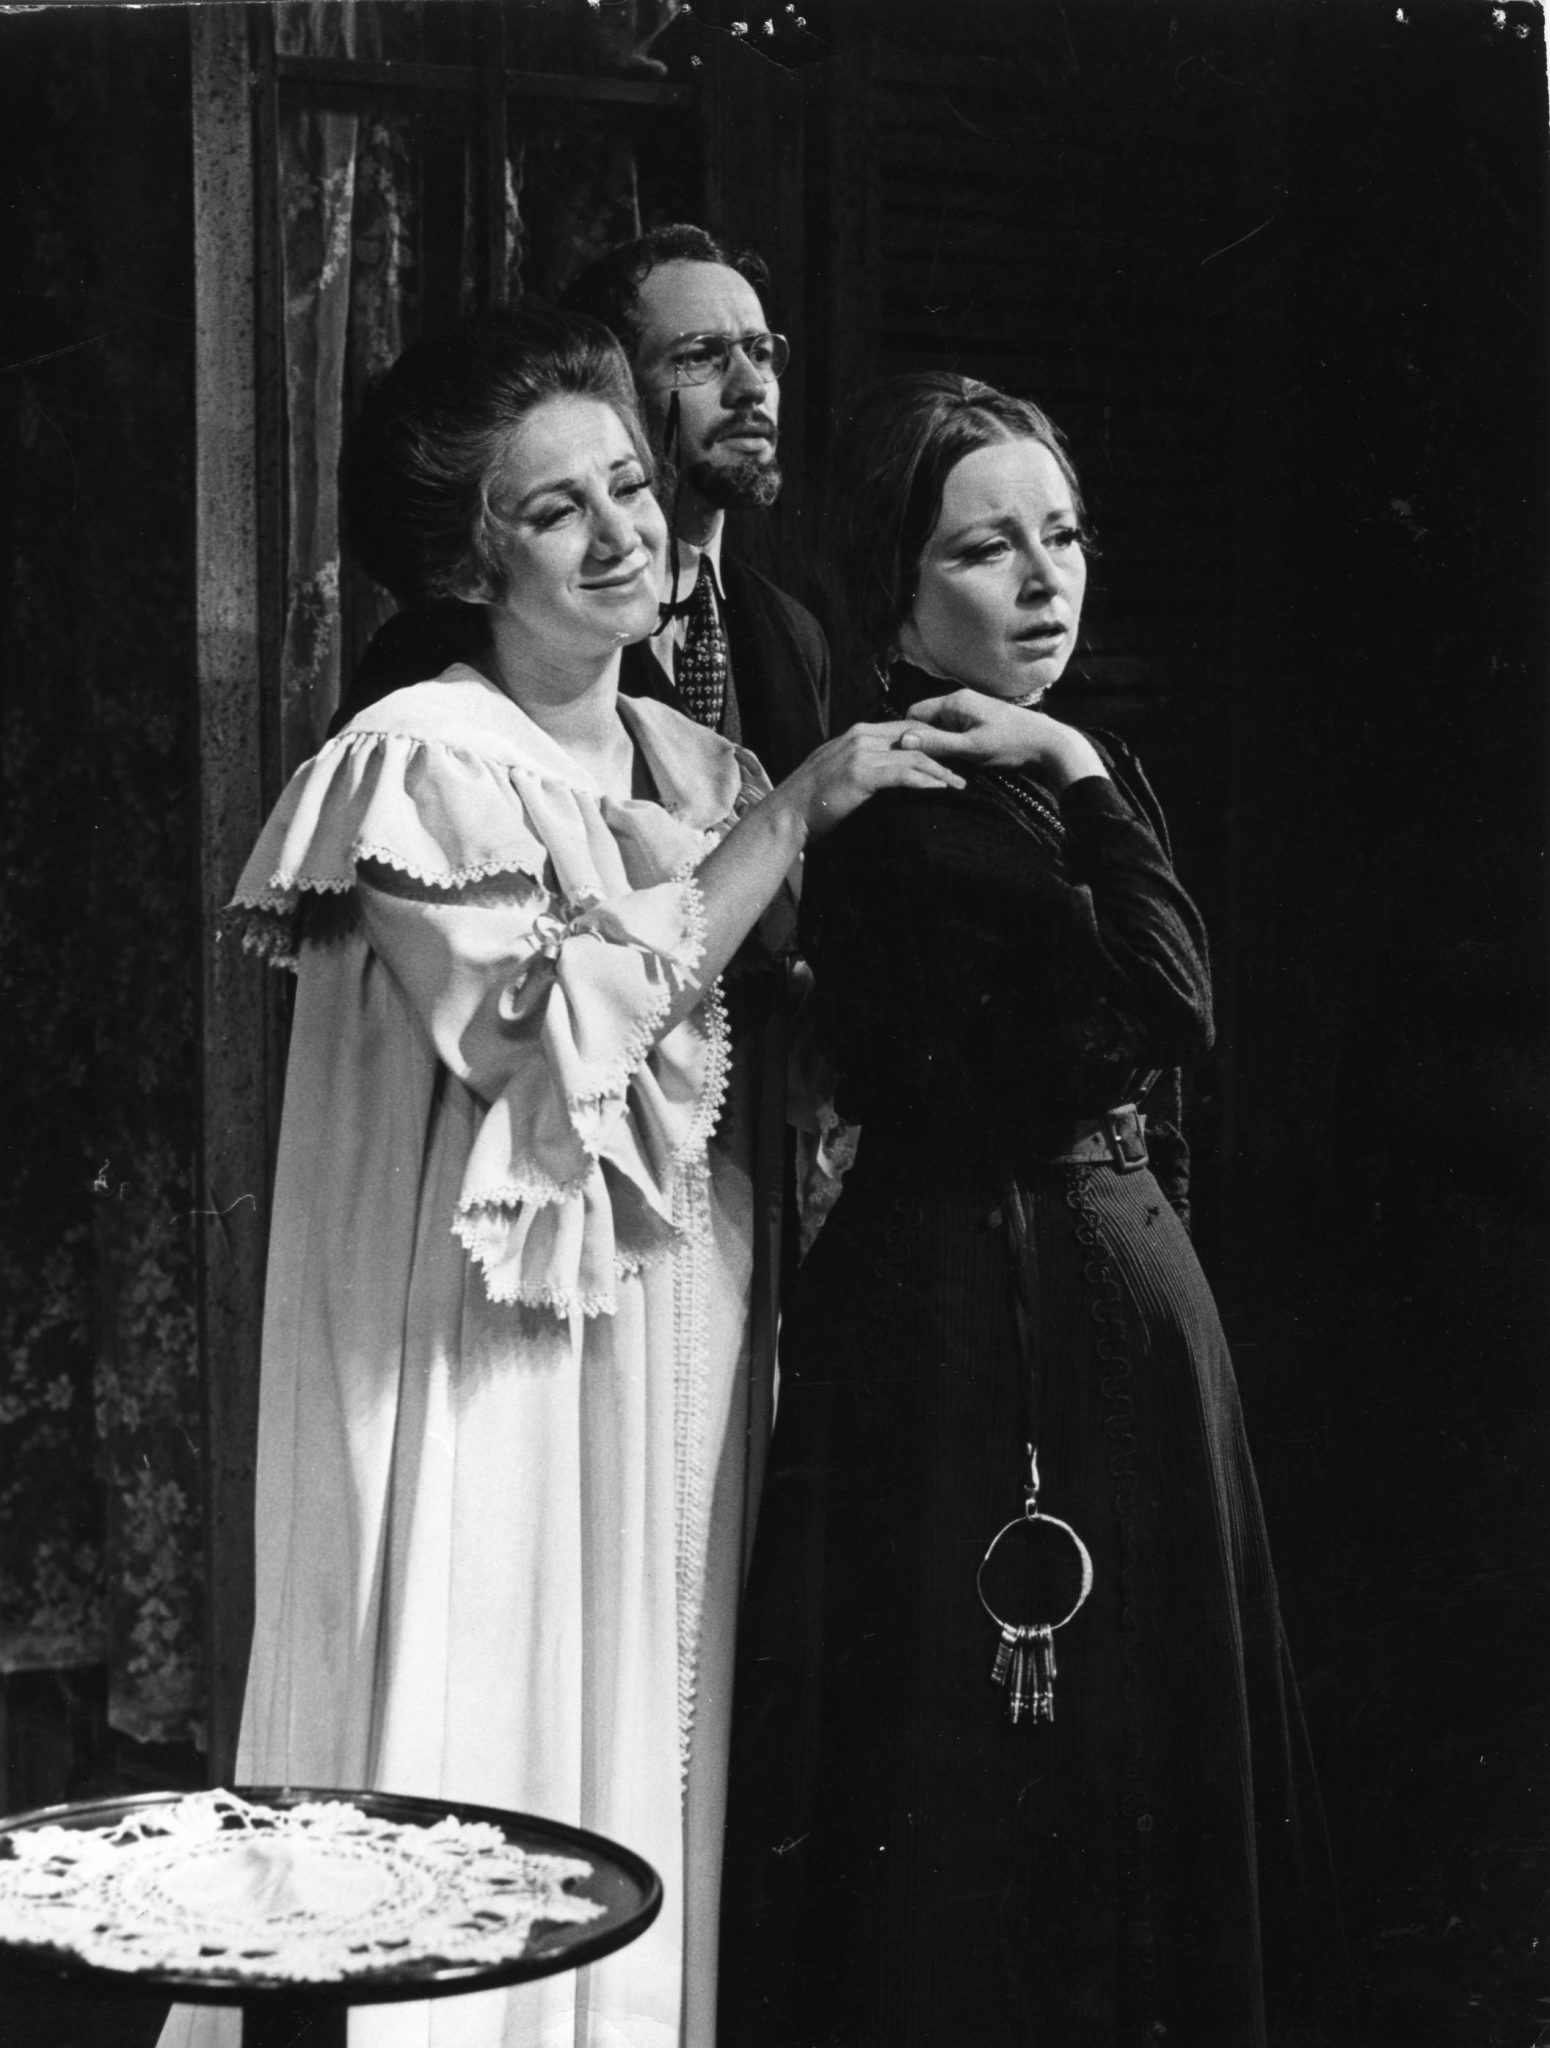 WTF's 1969 production of THE CHERRY ORCHARD, directed by Nikos Psacharopoulos; Olympia Dukakis, Charles Siebert, and Joyce Ebert